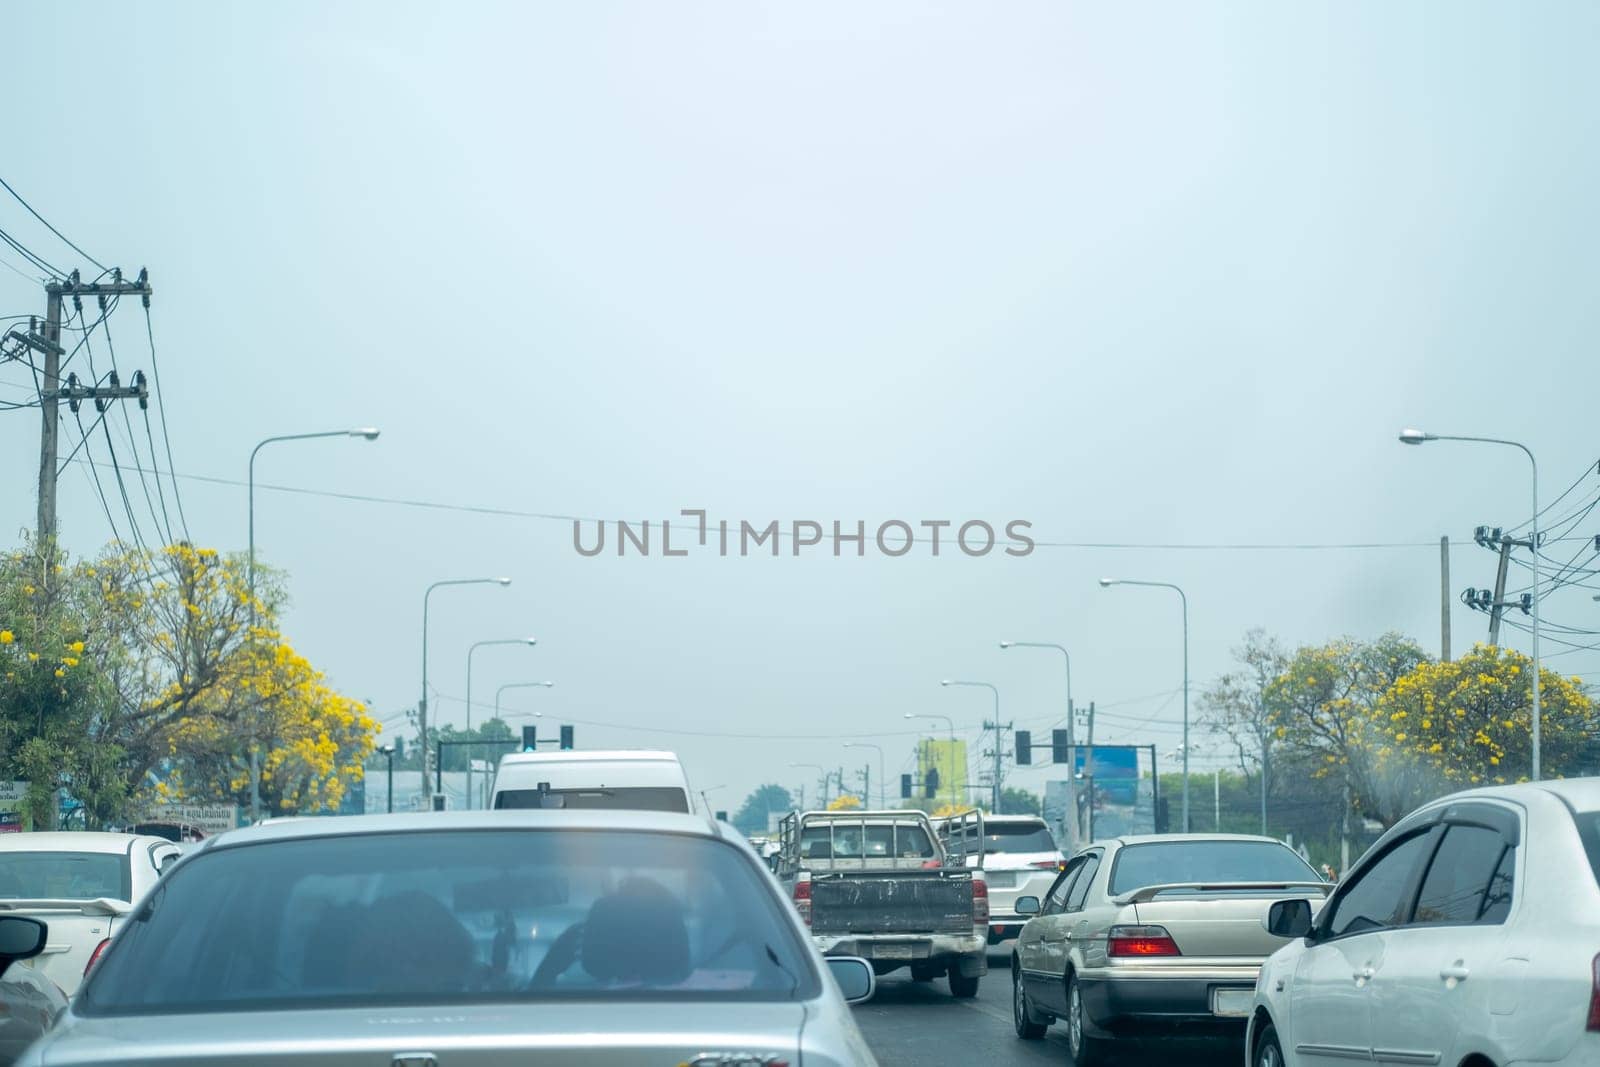 Concept of Air pollution PM2.5 Unhealthy toxic dust haze spread in road city by wuttichaicci